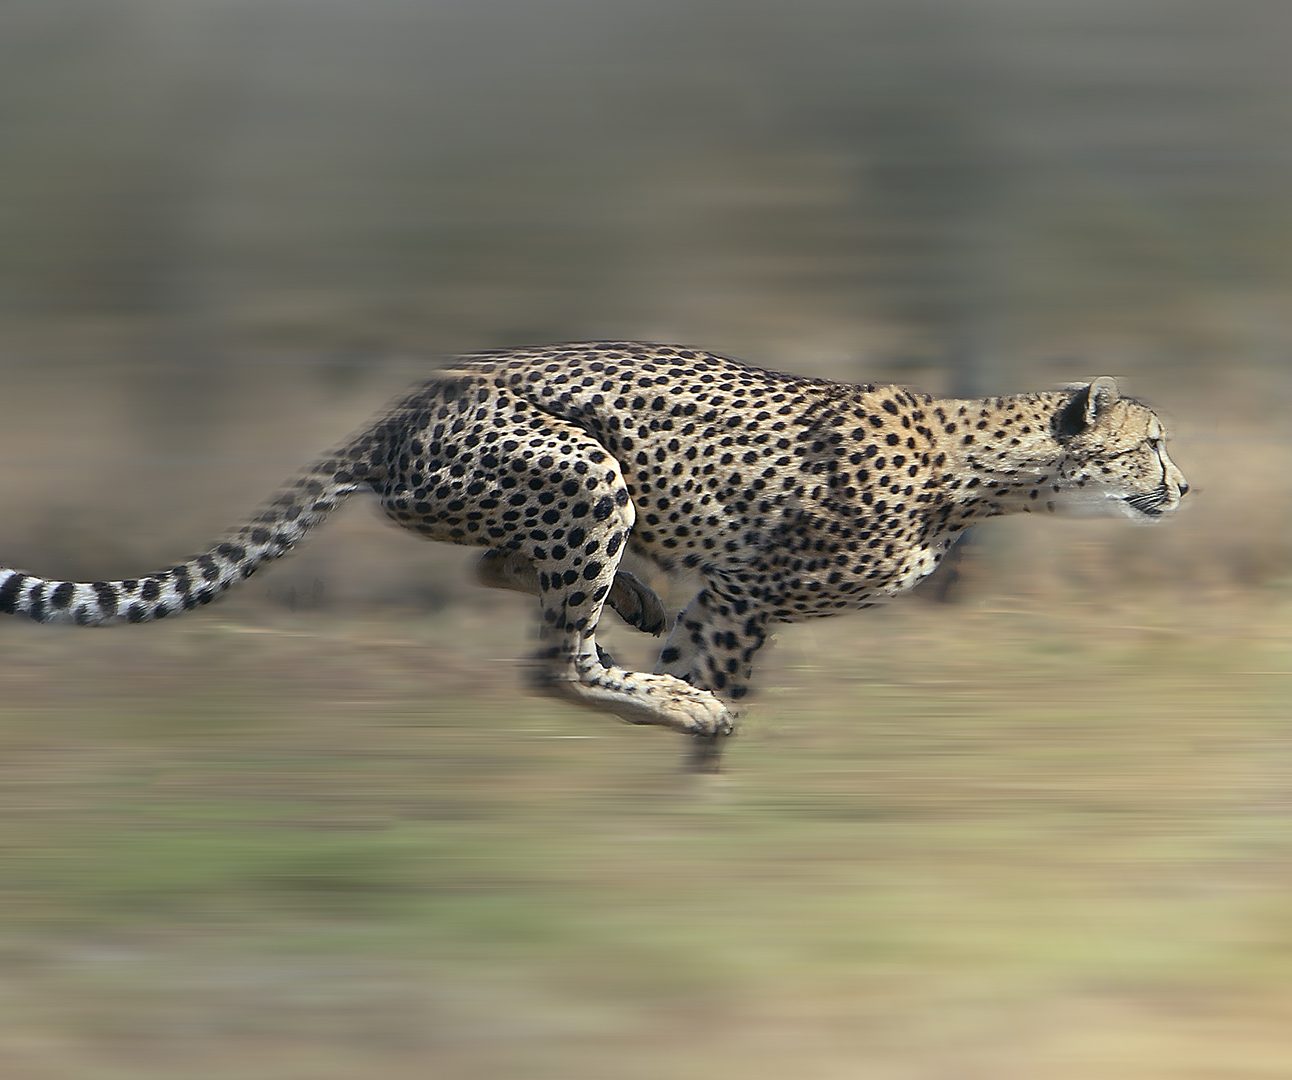 A cheetah running at full speed with blurred background